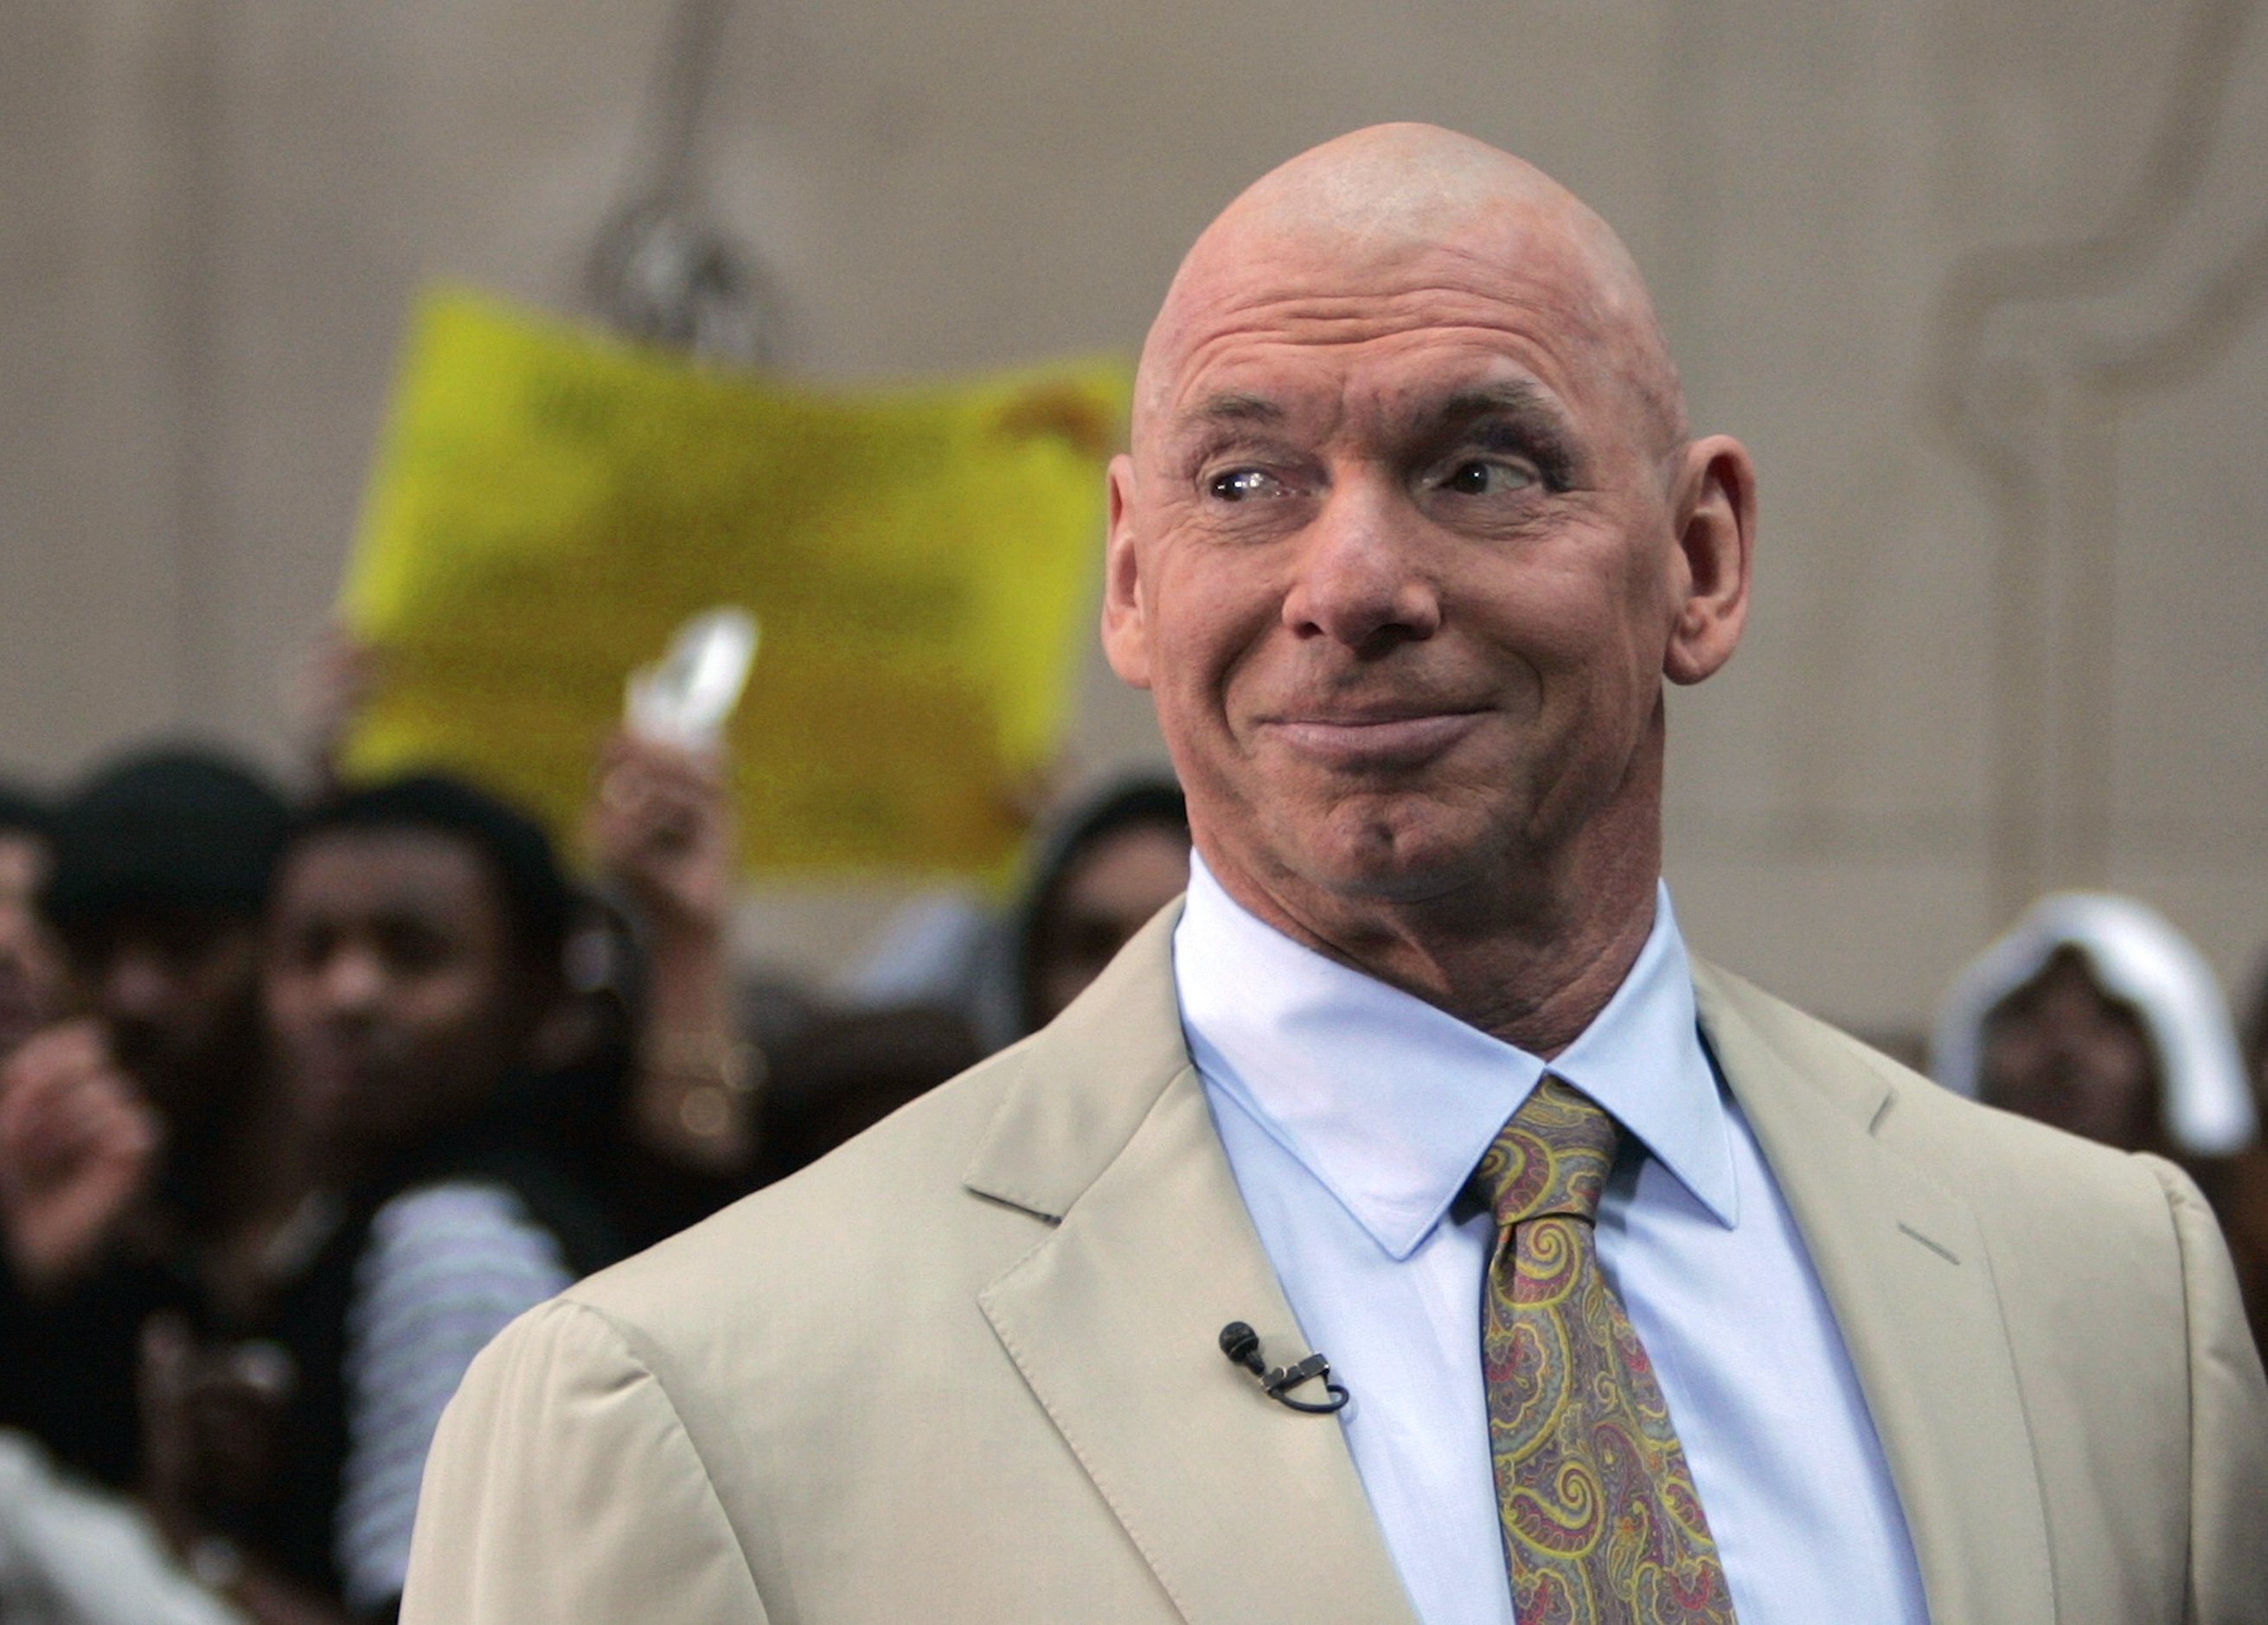 File photo of World Wrestling Entertainment owner Vince McMahon in New York